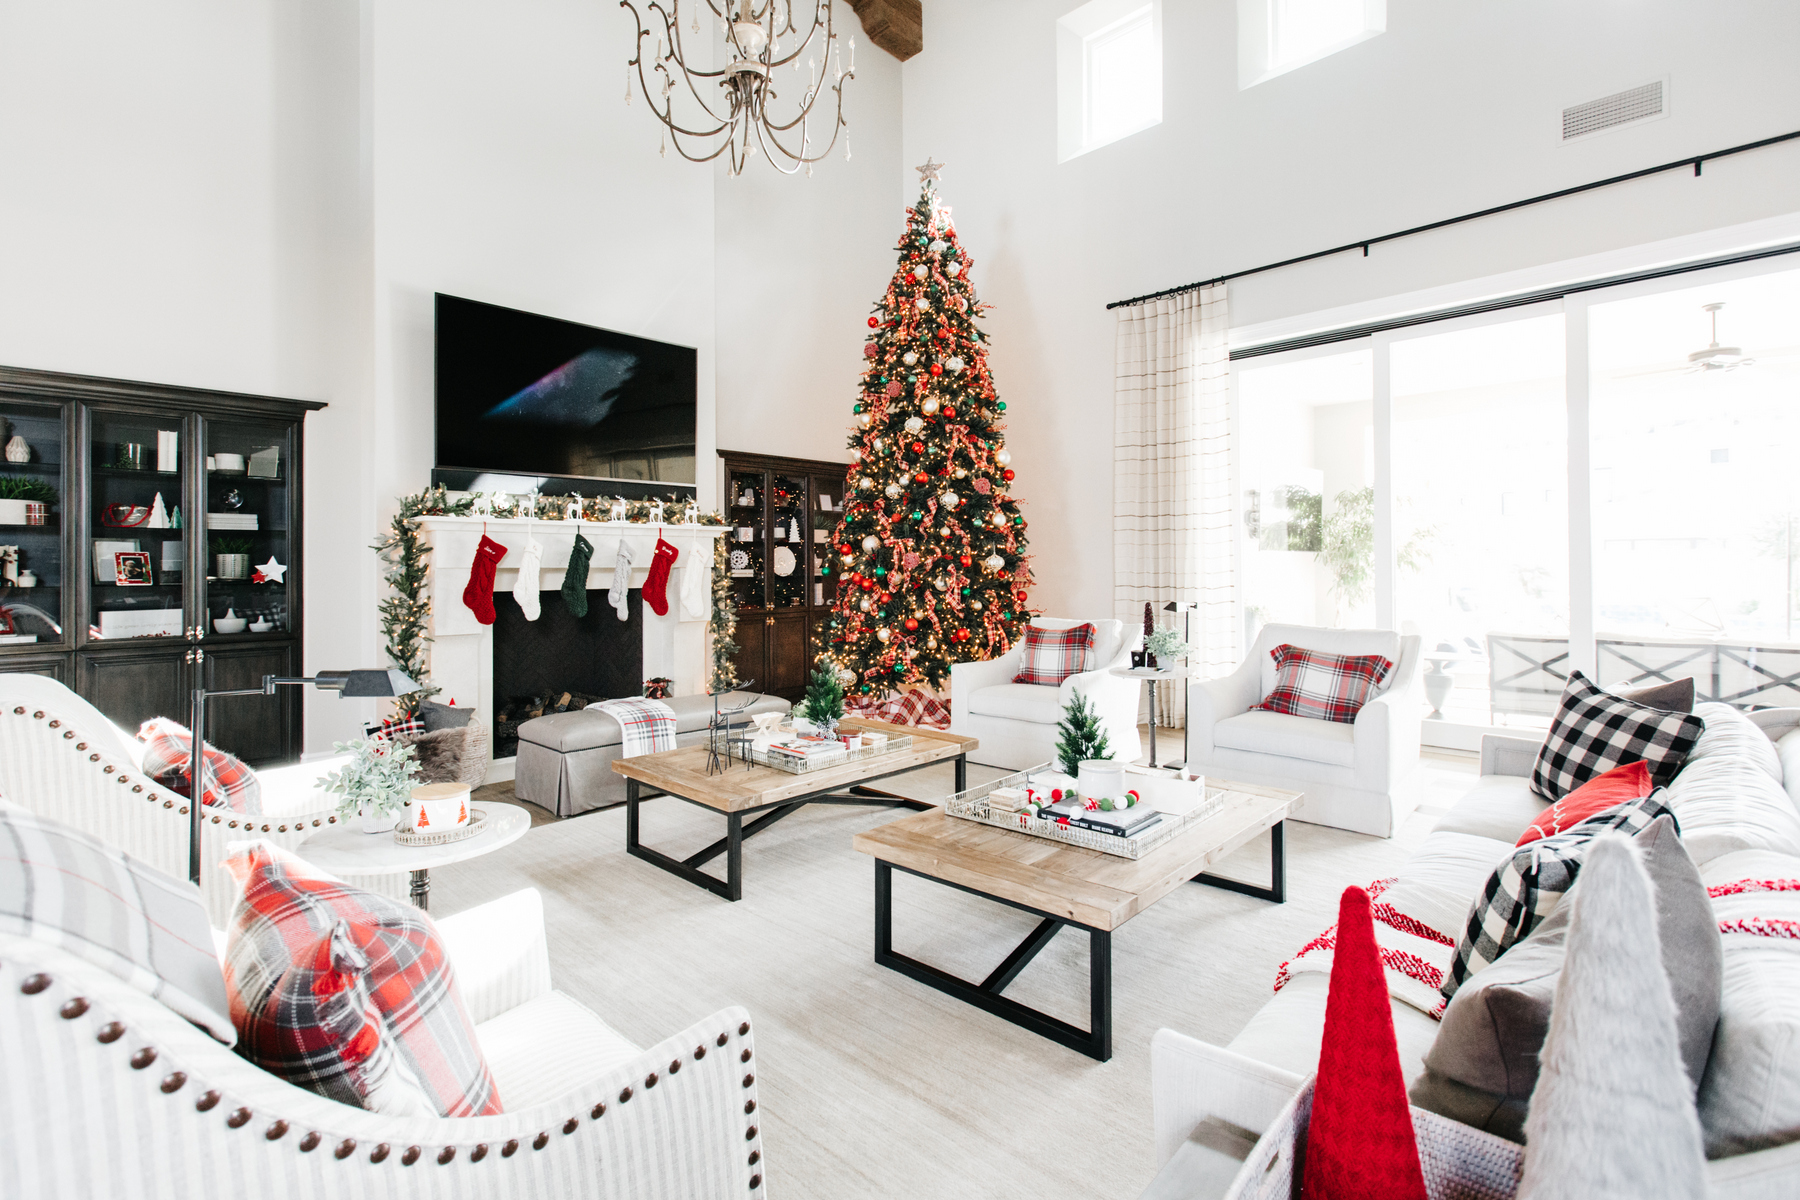 Gorgeous Custom Home Decorated for Christmas | Styled by The TomKat Studio